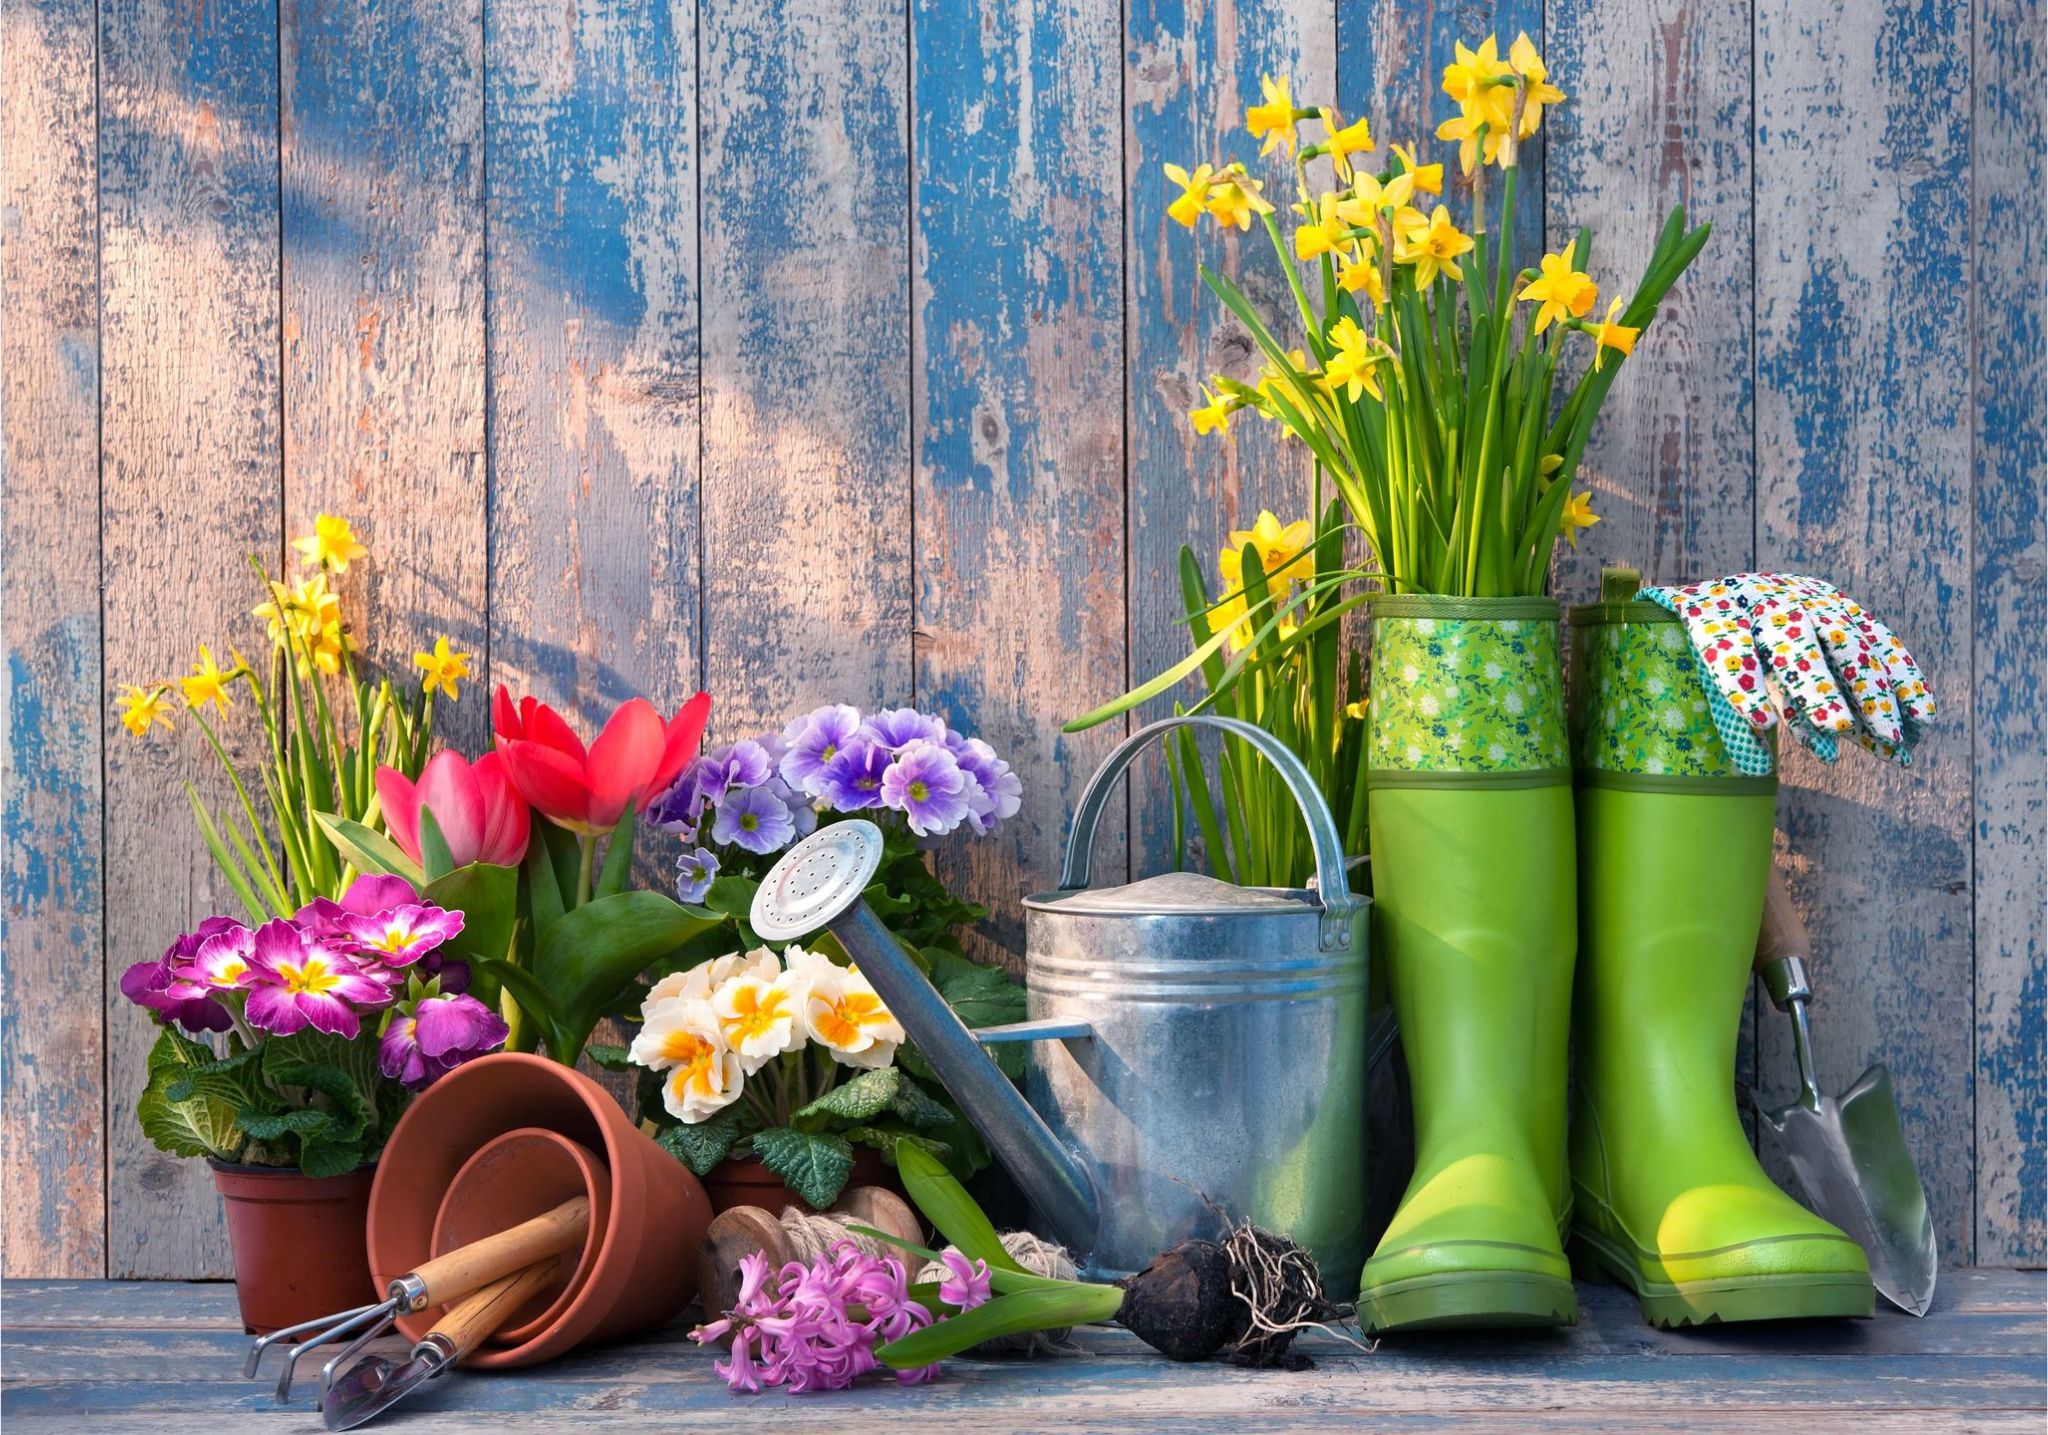 Flower pots, gardening rake, tools, and rubber boot